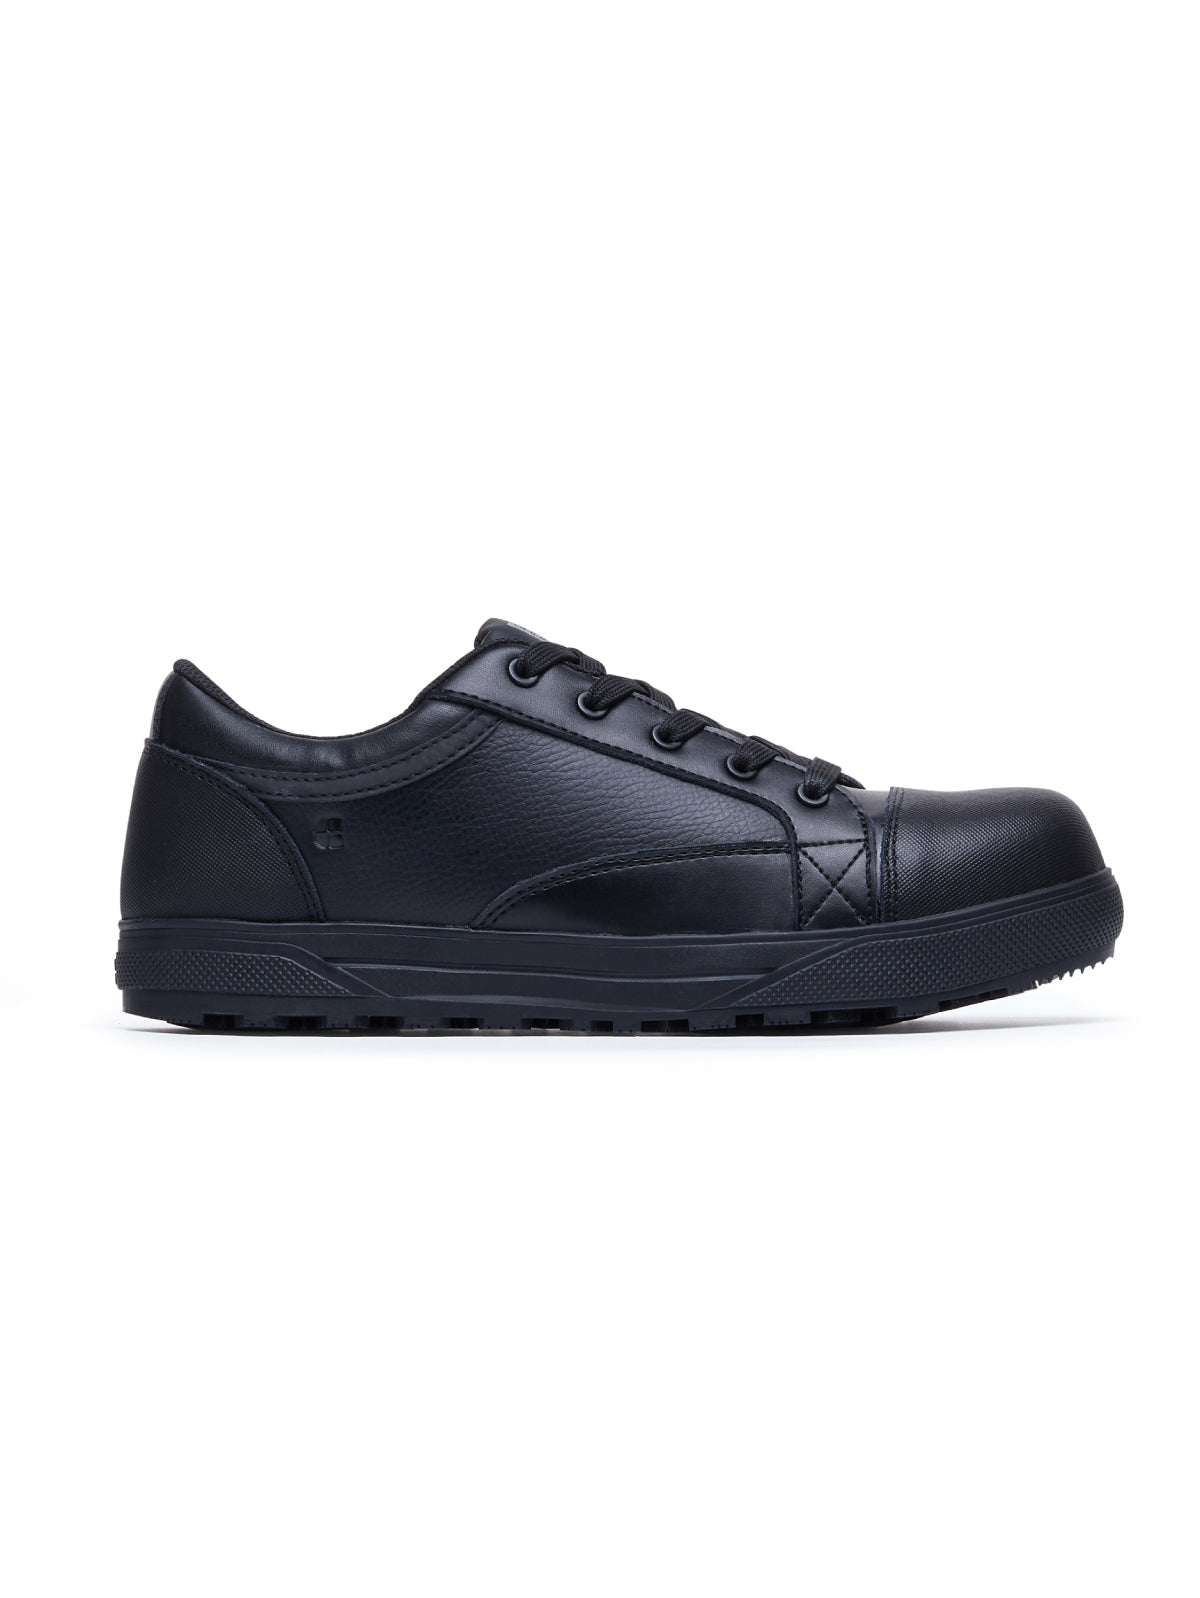 Unisex Safety Shoe Fergus Black (S3) by Shoes For Crews -  ChefsCotton